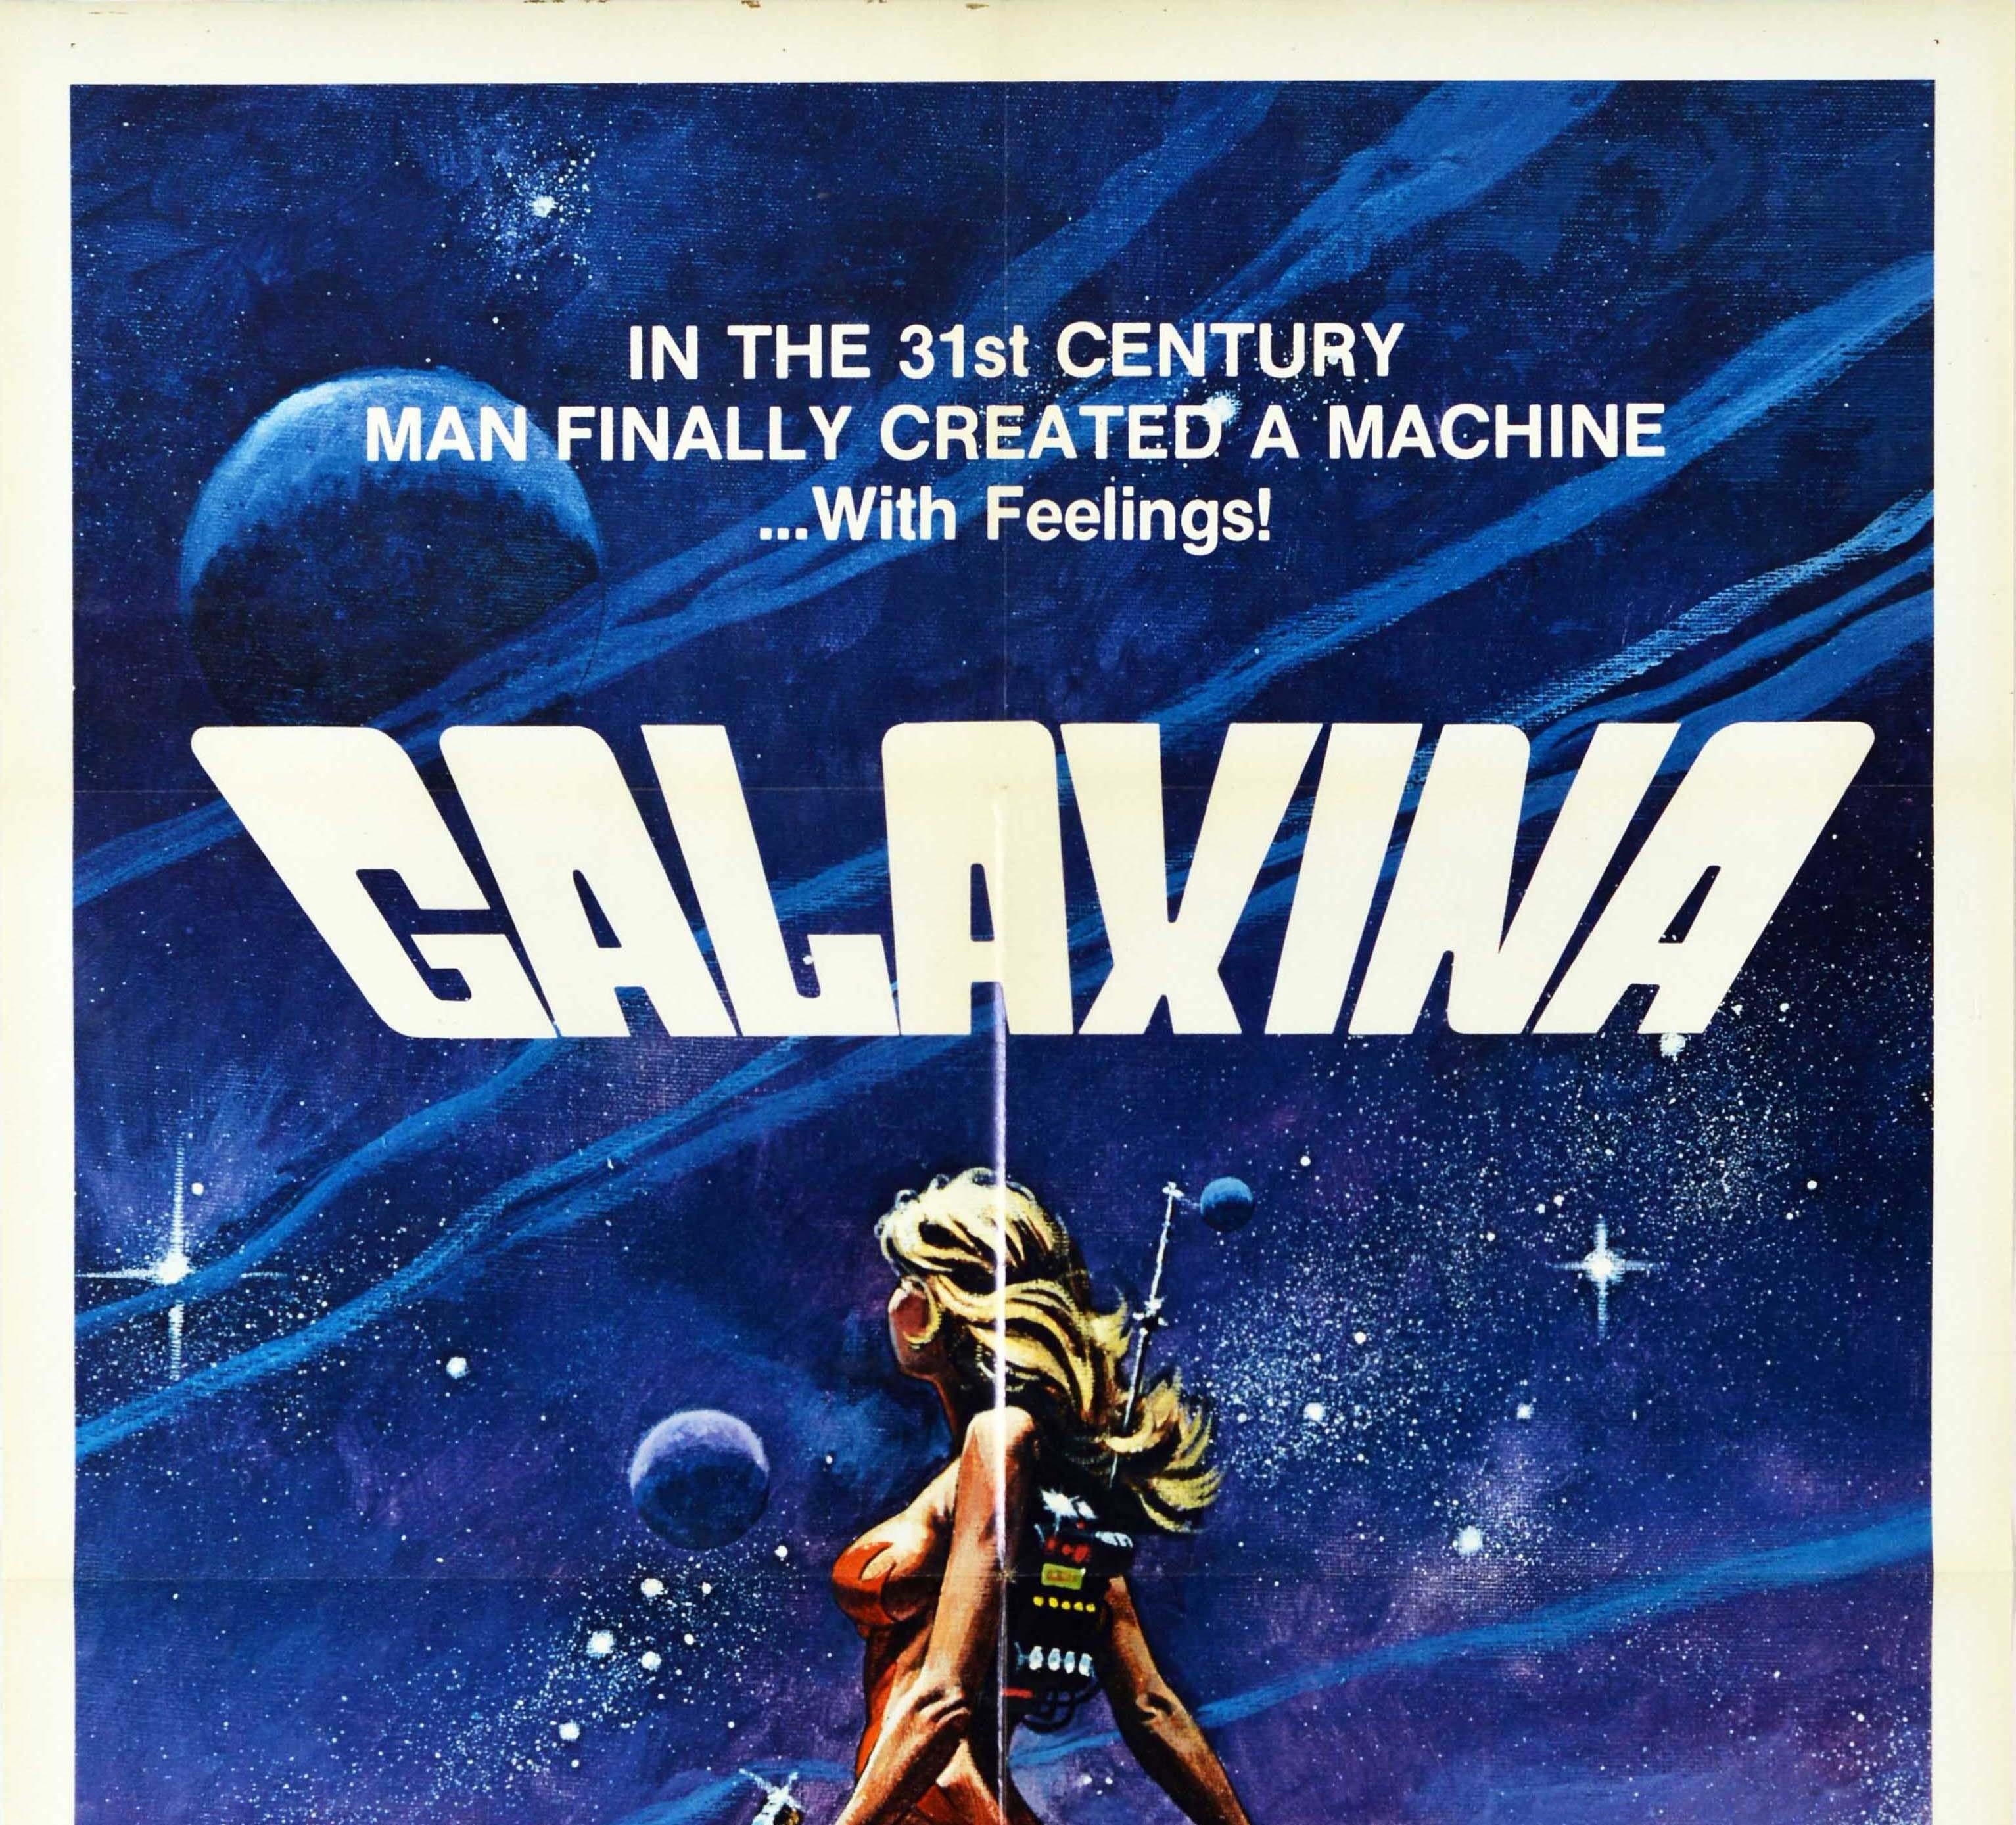 Original vintage movie poster for an American science fiction space comedy film Galaxina directed by William Sachs and starring Stephen Macht, Avery Schreiber, James David Hinton and introducing the 1980 Playboy Playmate of the Year Dorothy Stratten